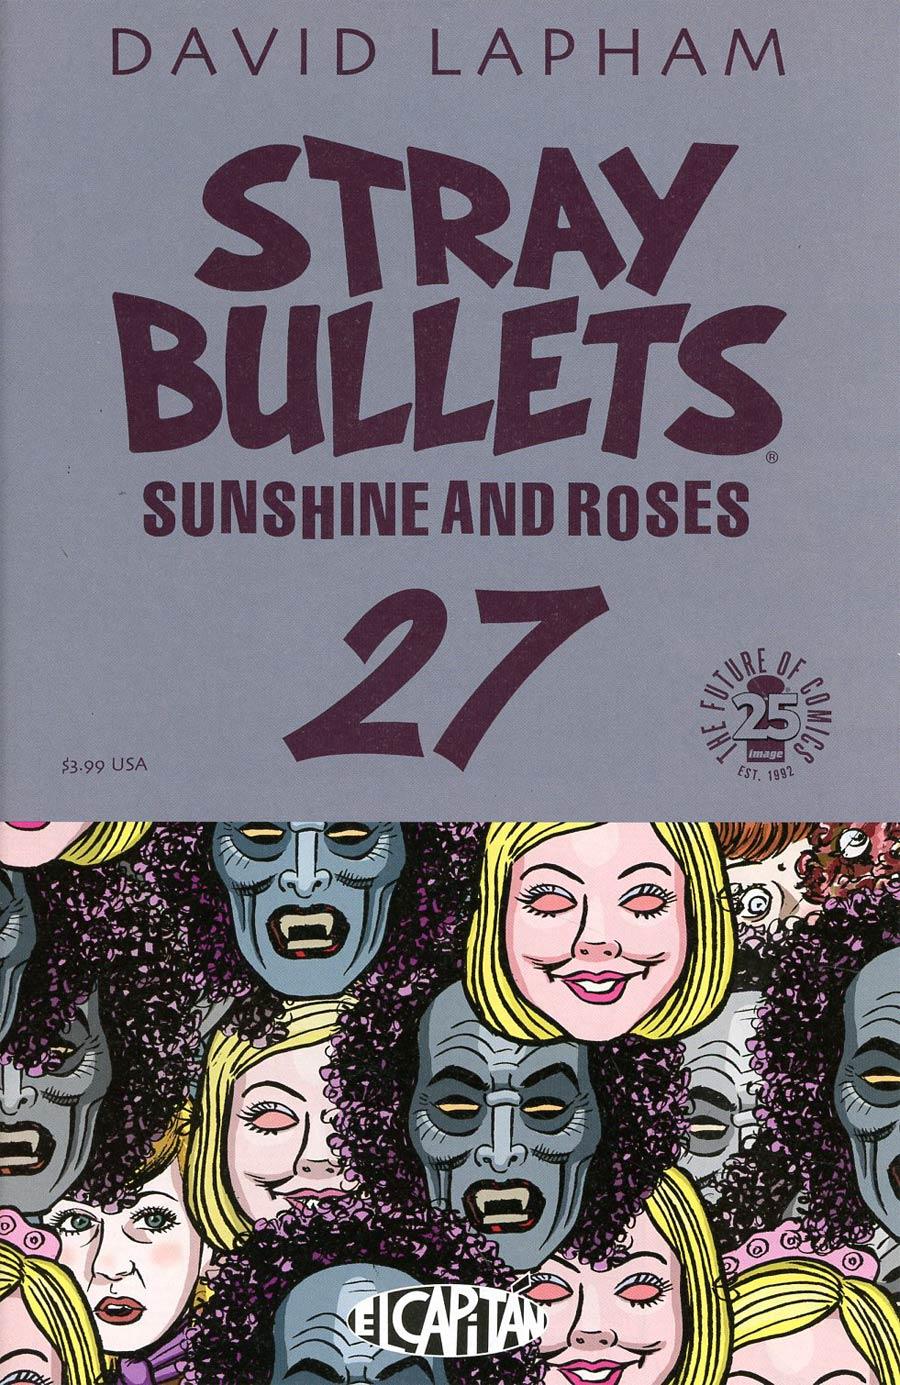 Stray Bullets Sunshine And Roses Vol. 1 #27